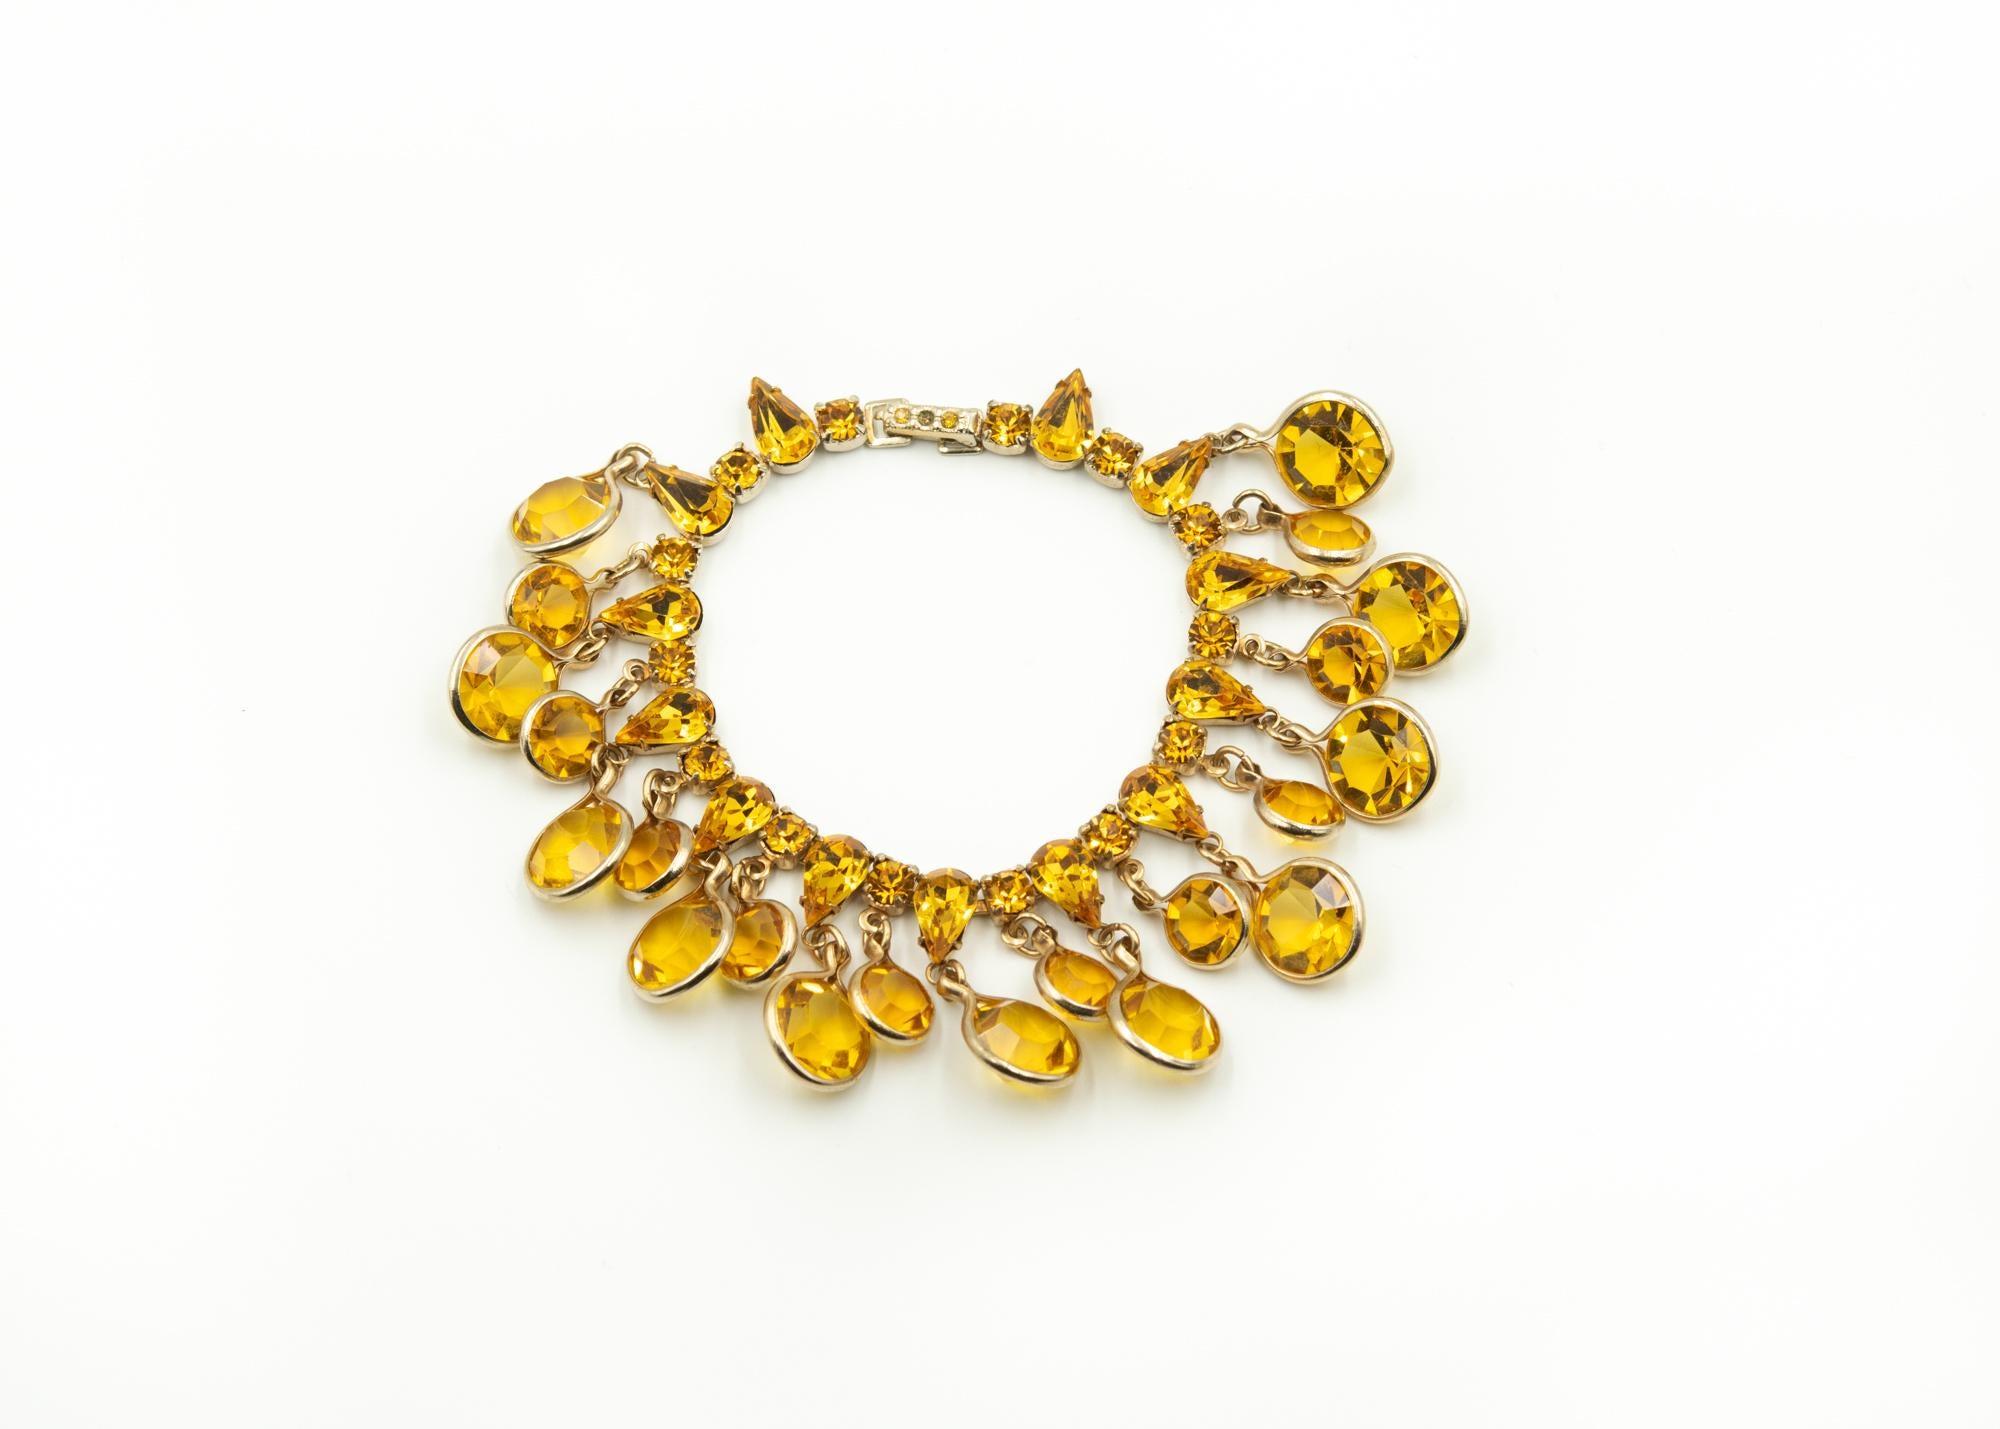 Fantastic fun 1940's Kramer dangling dancing citrine drop earrings and bracelet demi-parure.  

The top section of the bracelet features pear shape prong set citrine colored rhinestones with prong set rounds between them.  Dangling from the above